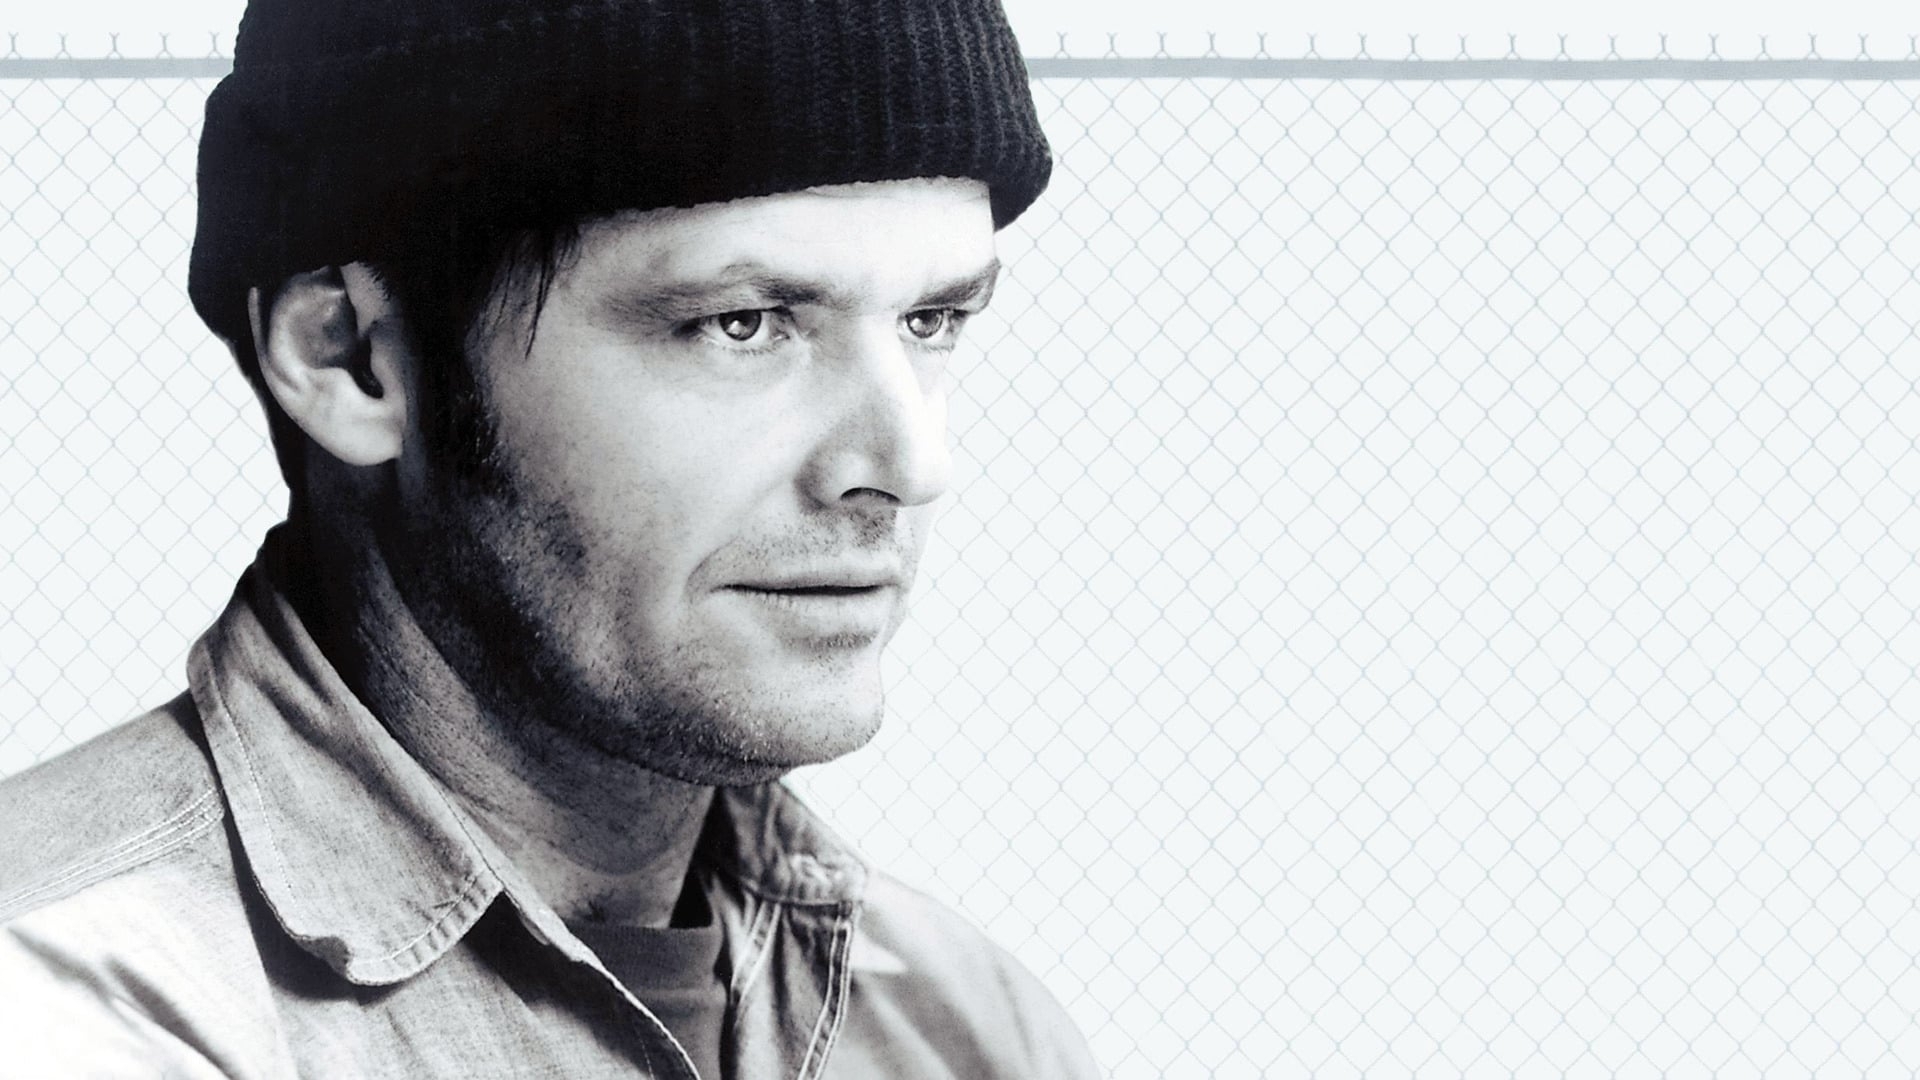 One Flew Over the Cuckoo's Nest (One Flew Over the Cuckoo's Nest)